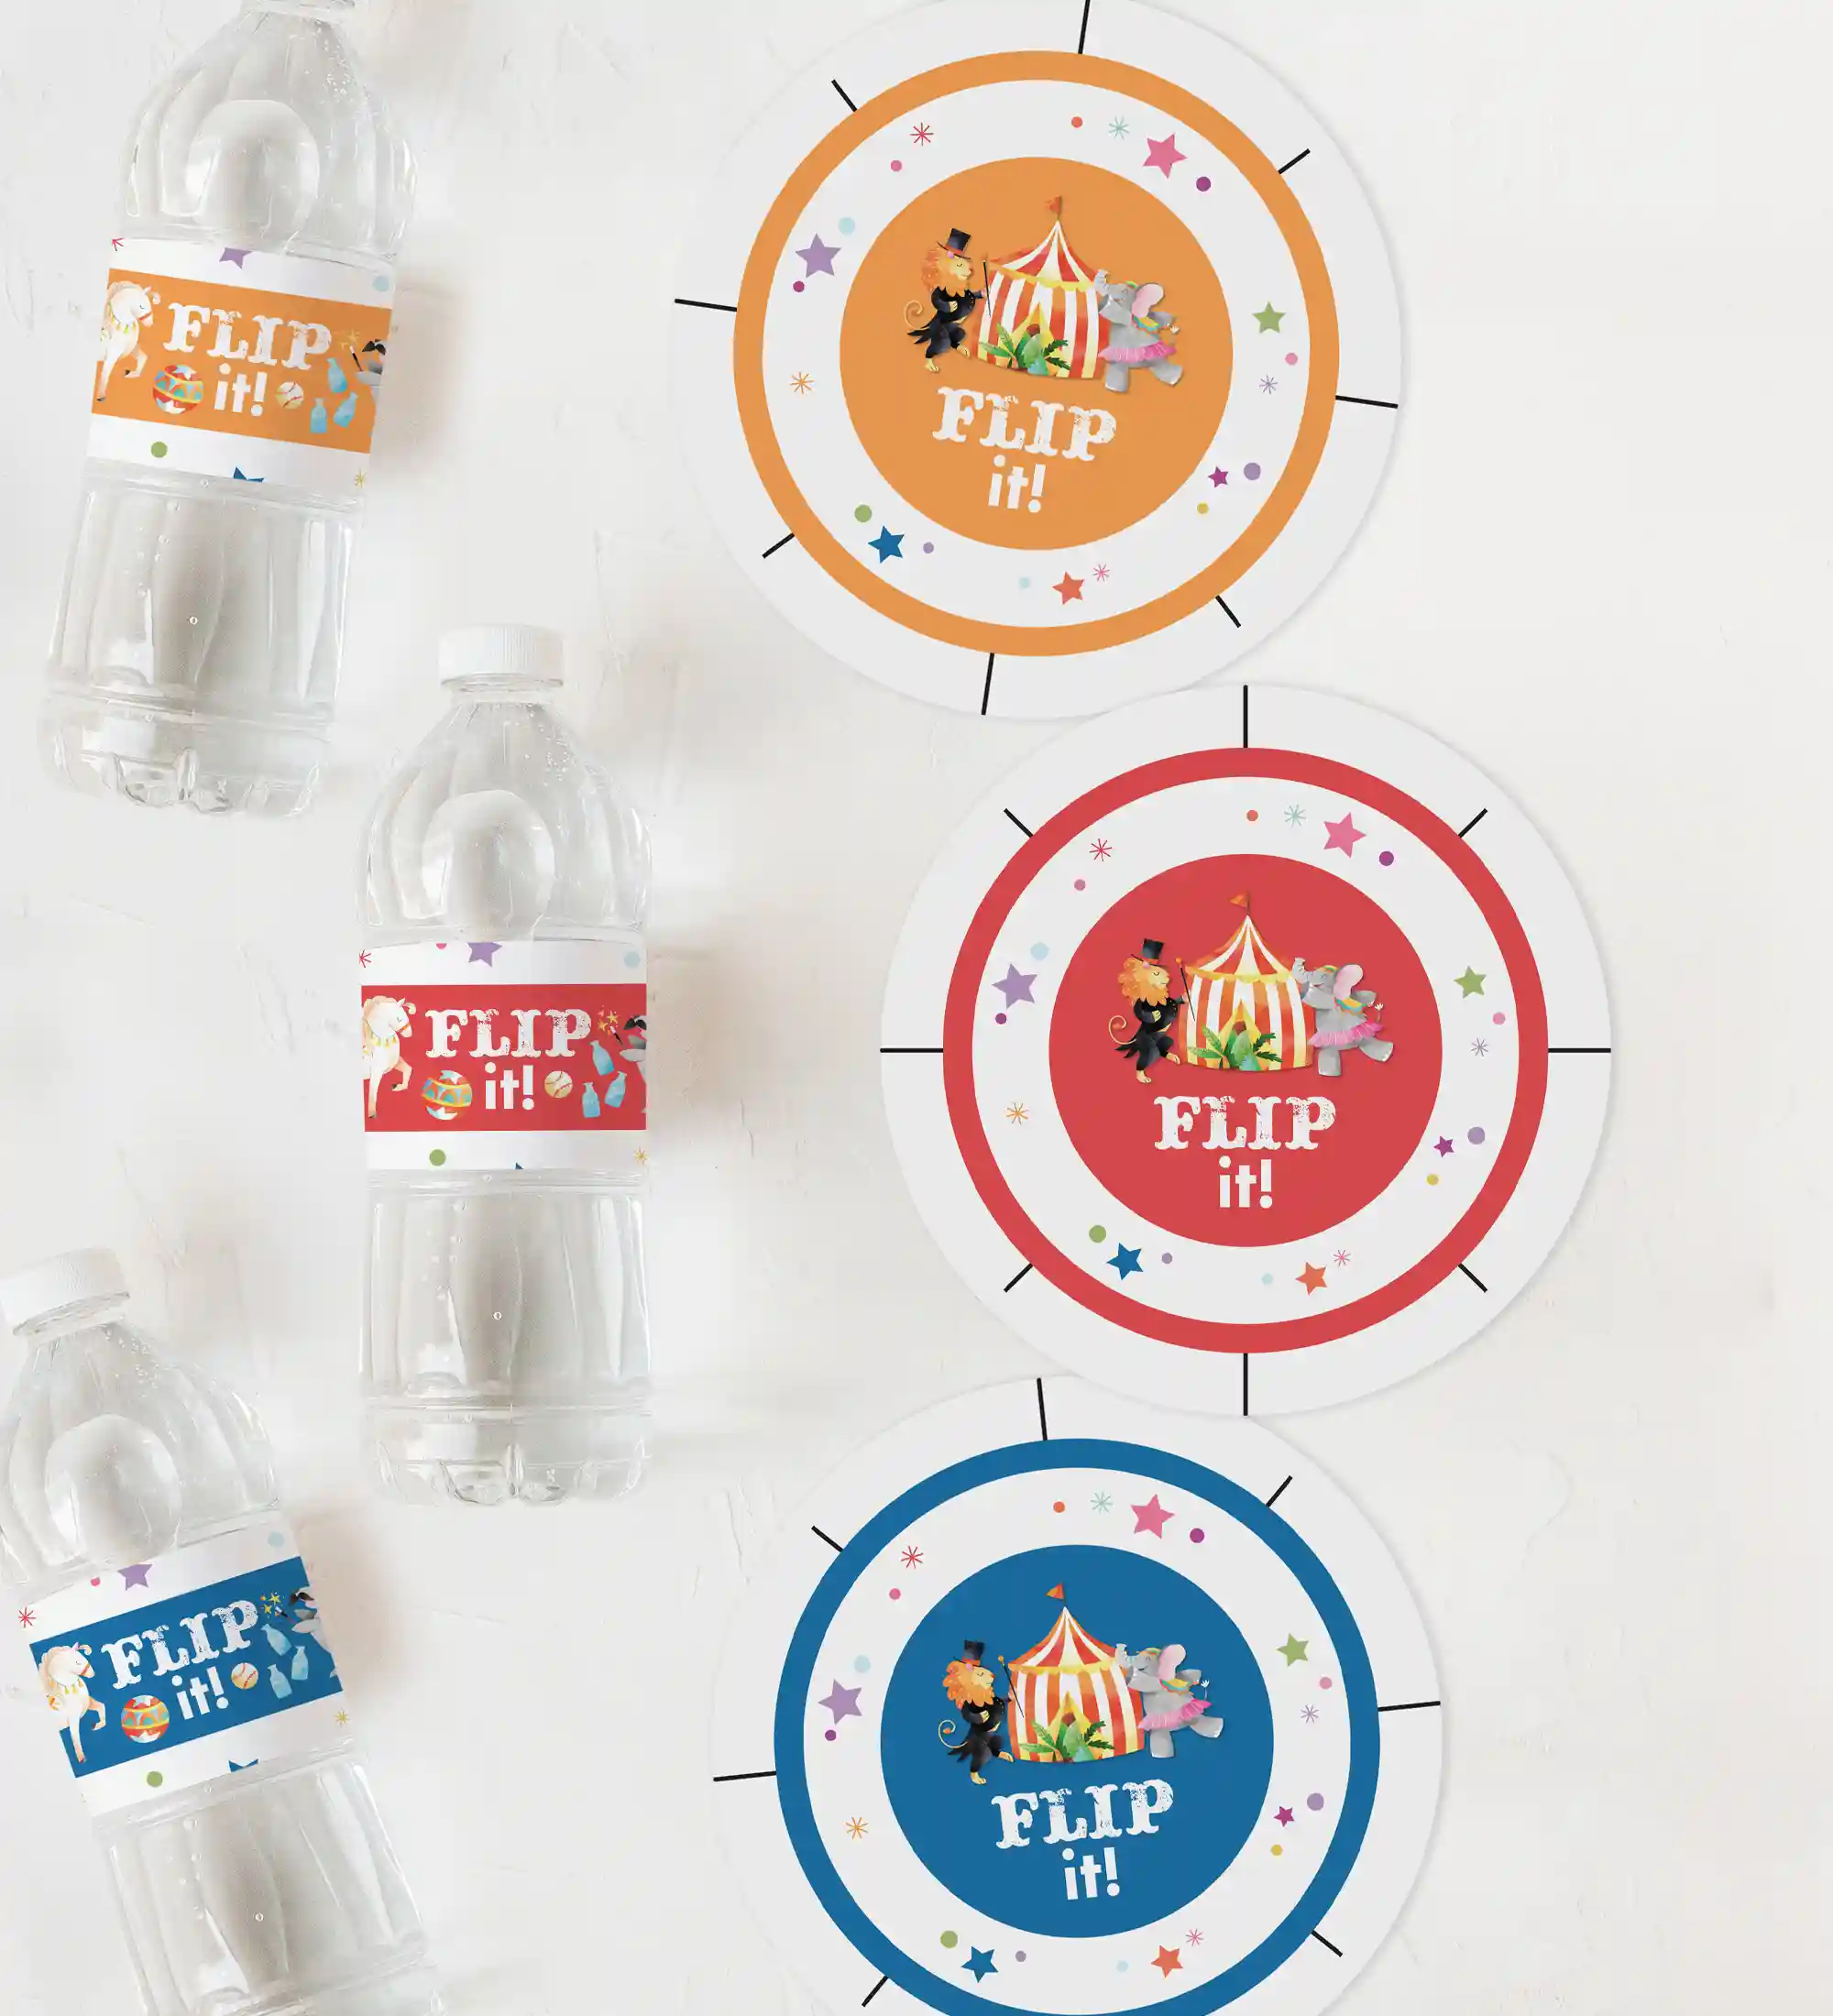 Water bottle flip carnival party game or a fun printable party game for a circus themed party. Printable includes water bottle labels, targets, and instructions.